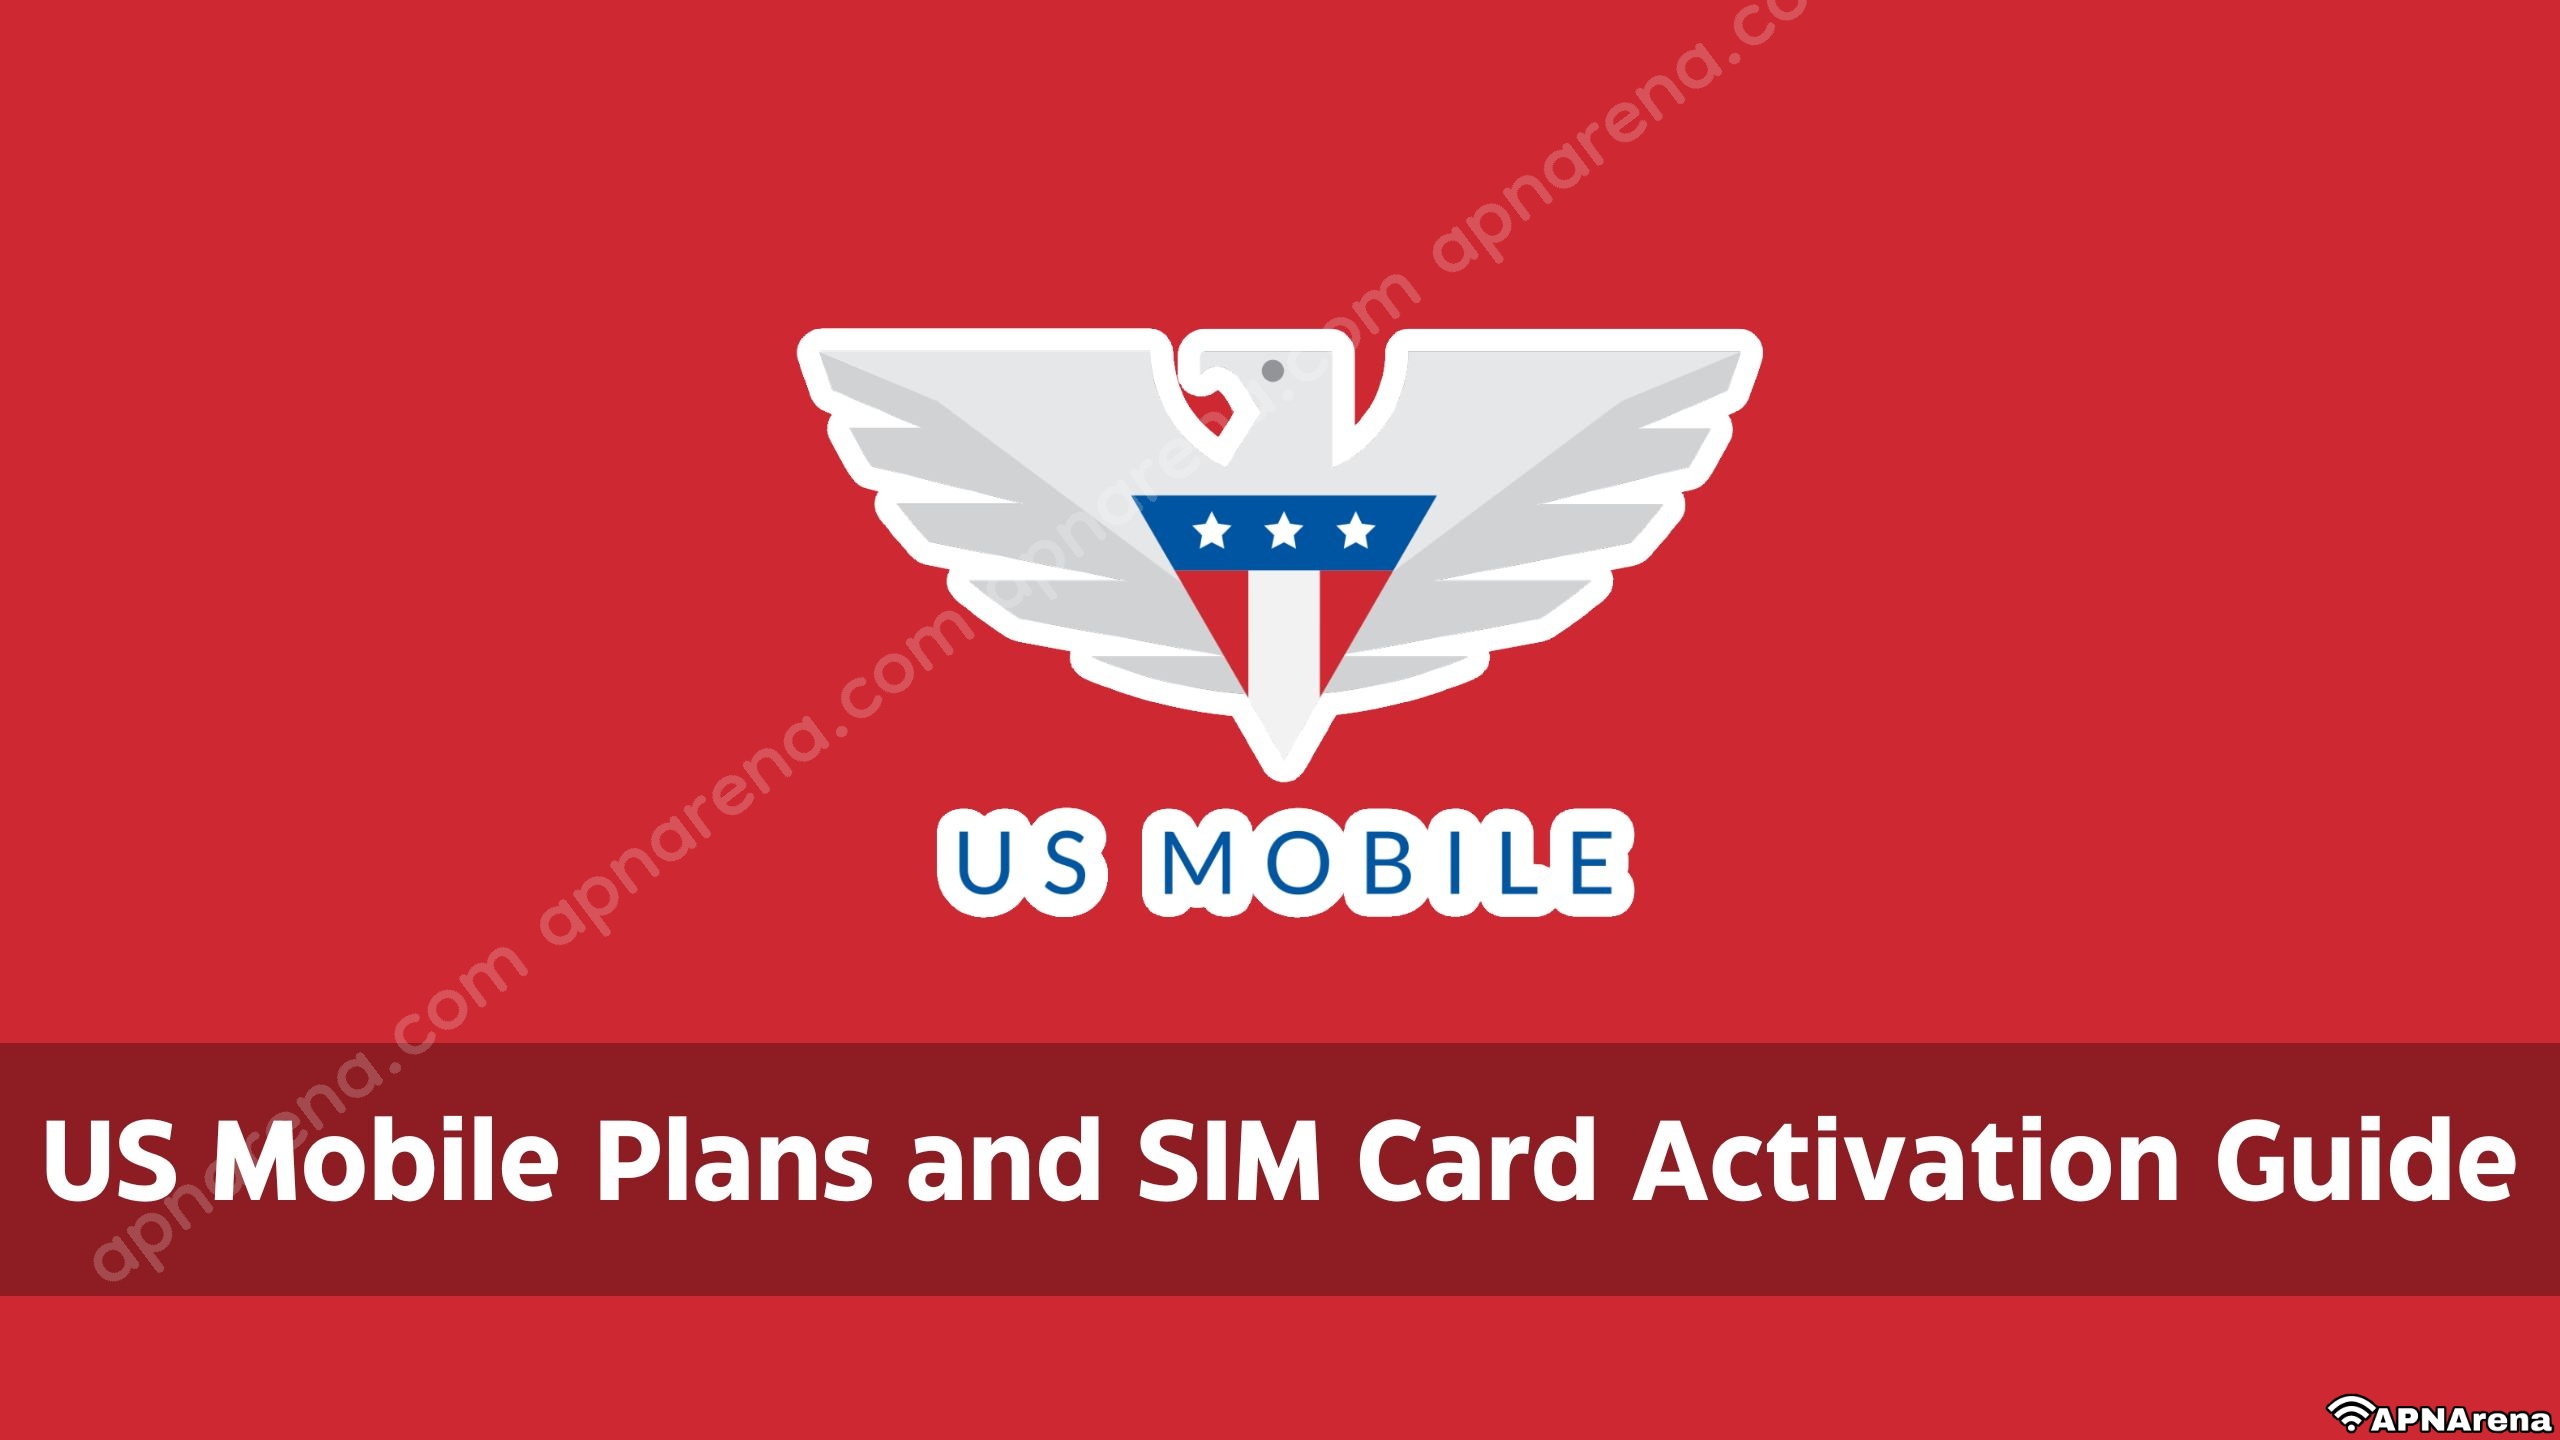 US Mobile Plans and SIM Card Activation Guide